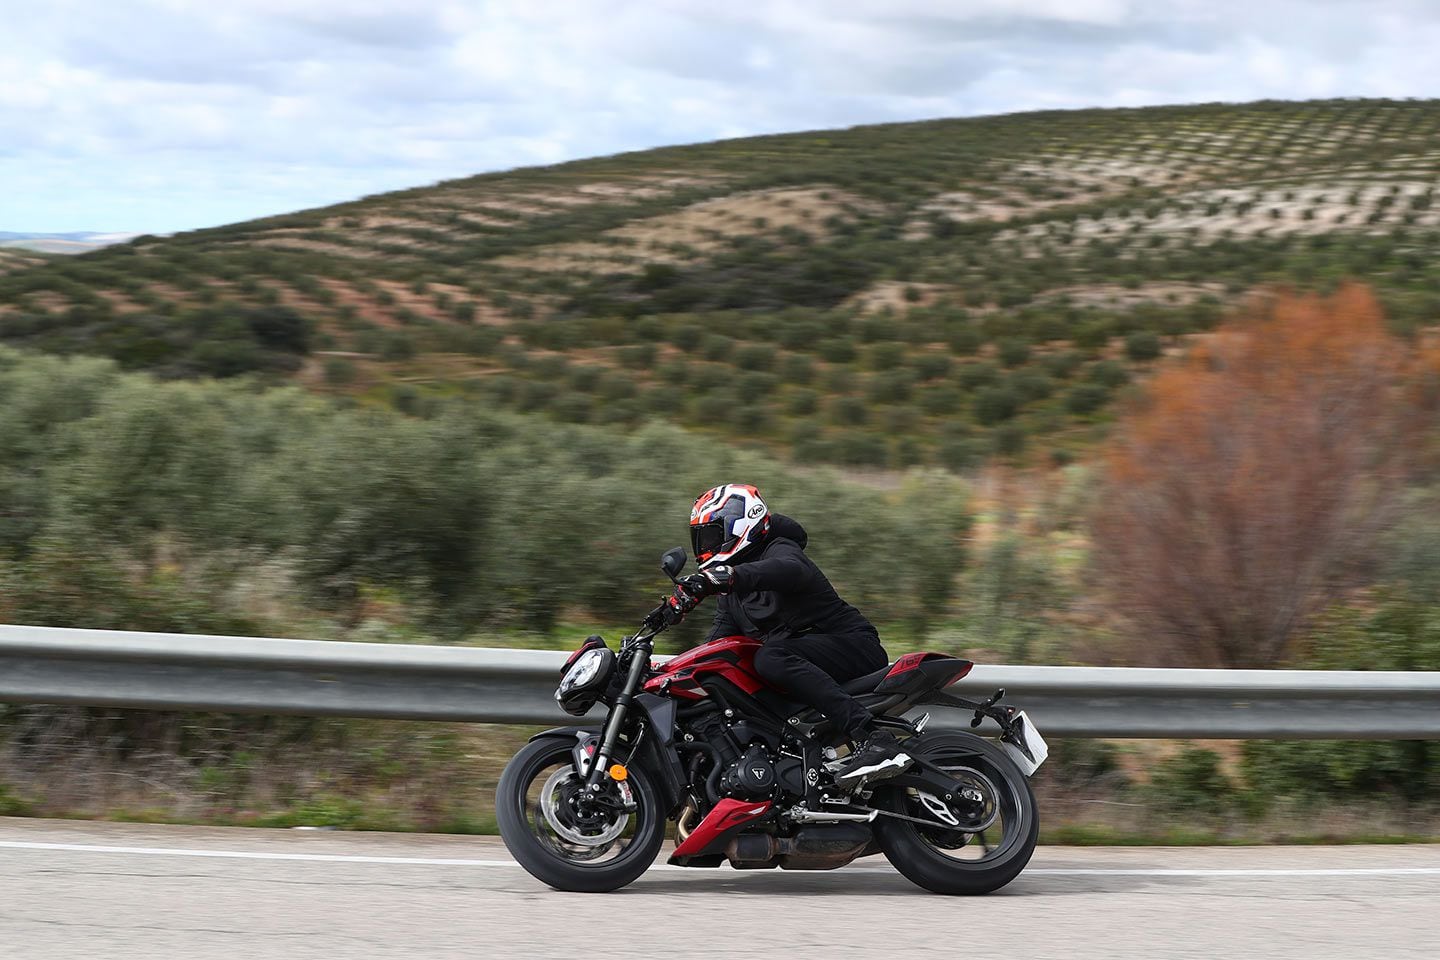 The Street Triple 765’s sportbike roots are obvious in the relatively high, rearward positioned footpegs. The gap between seat and pegs can feel tight for anyone over 6 feet tall.